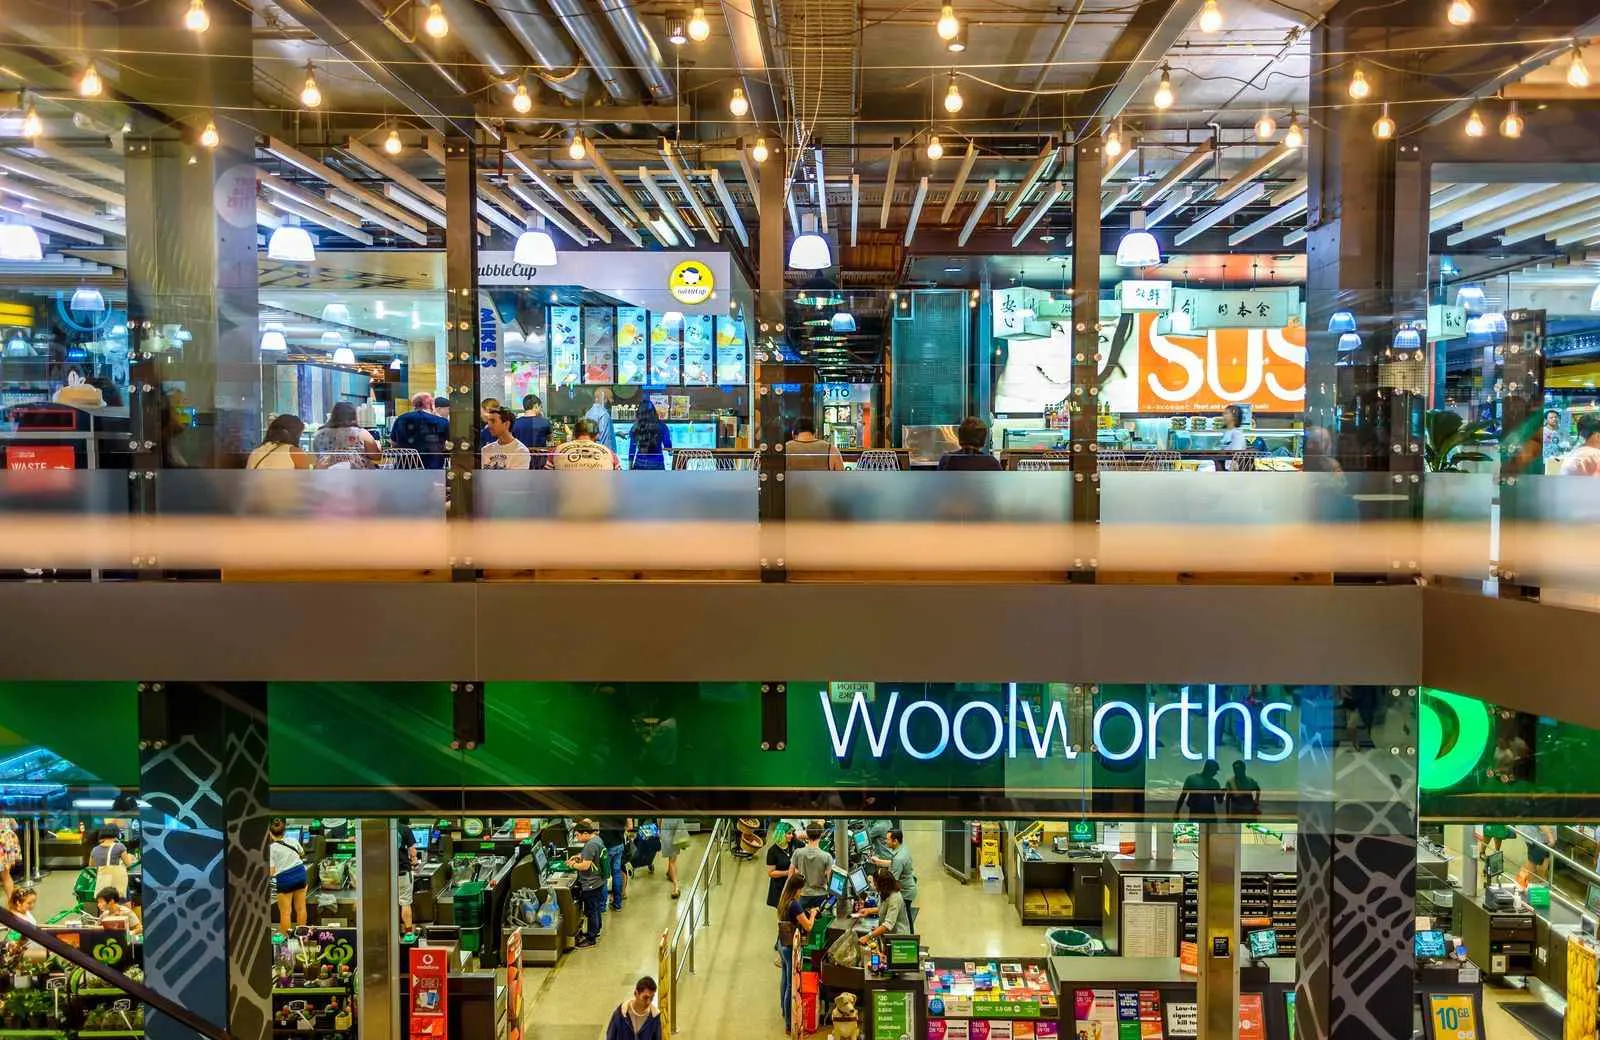 If you're lucky, there might be a Woolworth's inside of a shopping center near you and there might even be other little markets in the shopping center too.